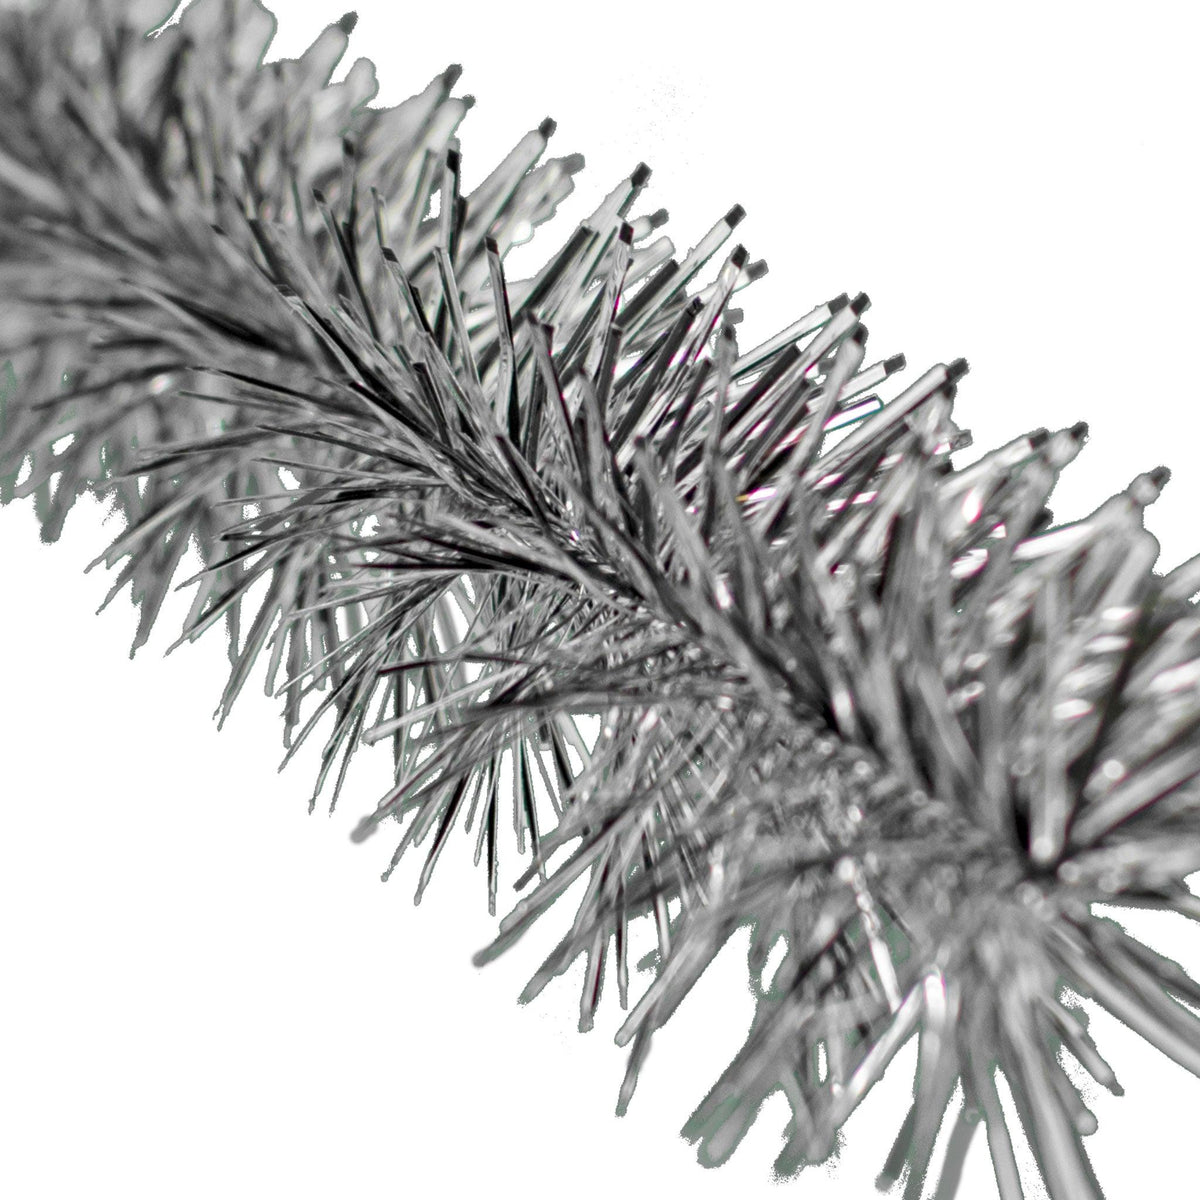 Lee Display's brand new 25ft Shiny Black and Metallic Silver Tinsel Garlands and Fringe Embellishments on sale at leedisplay.com